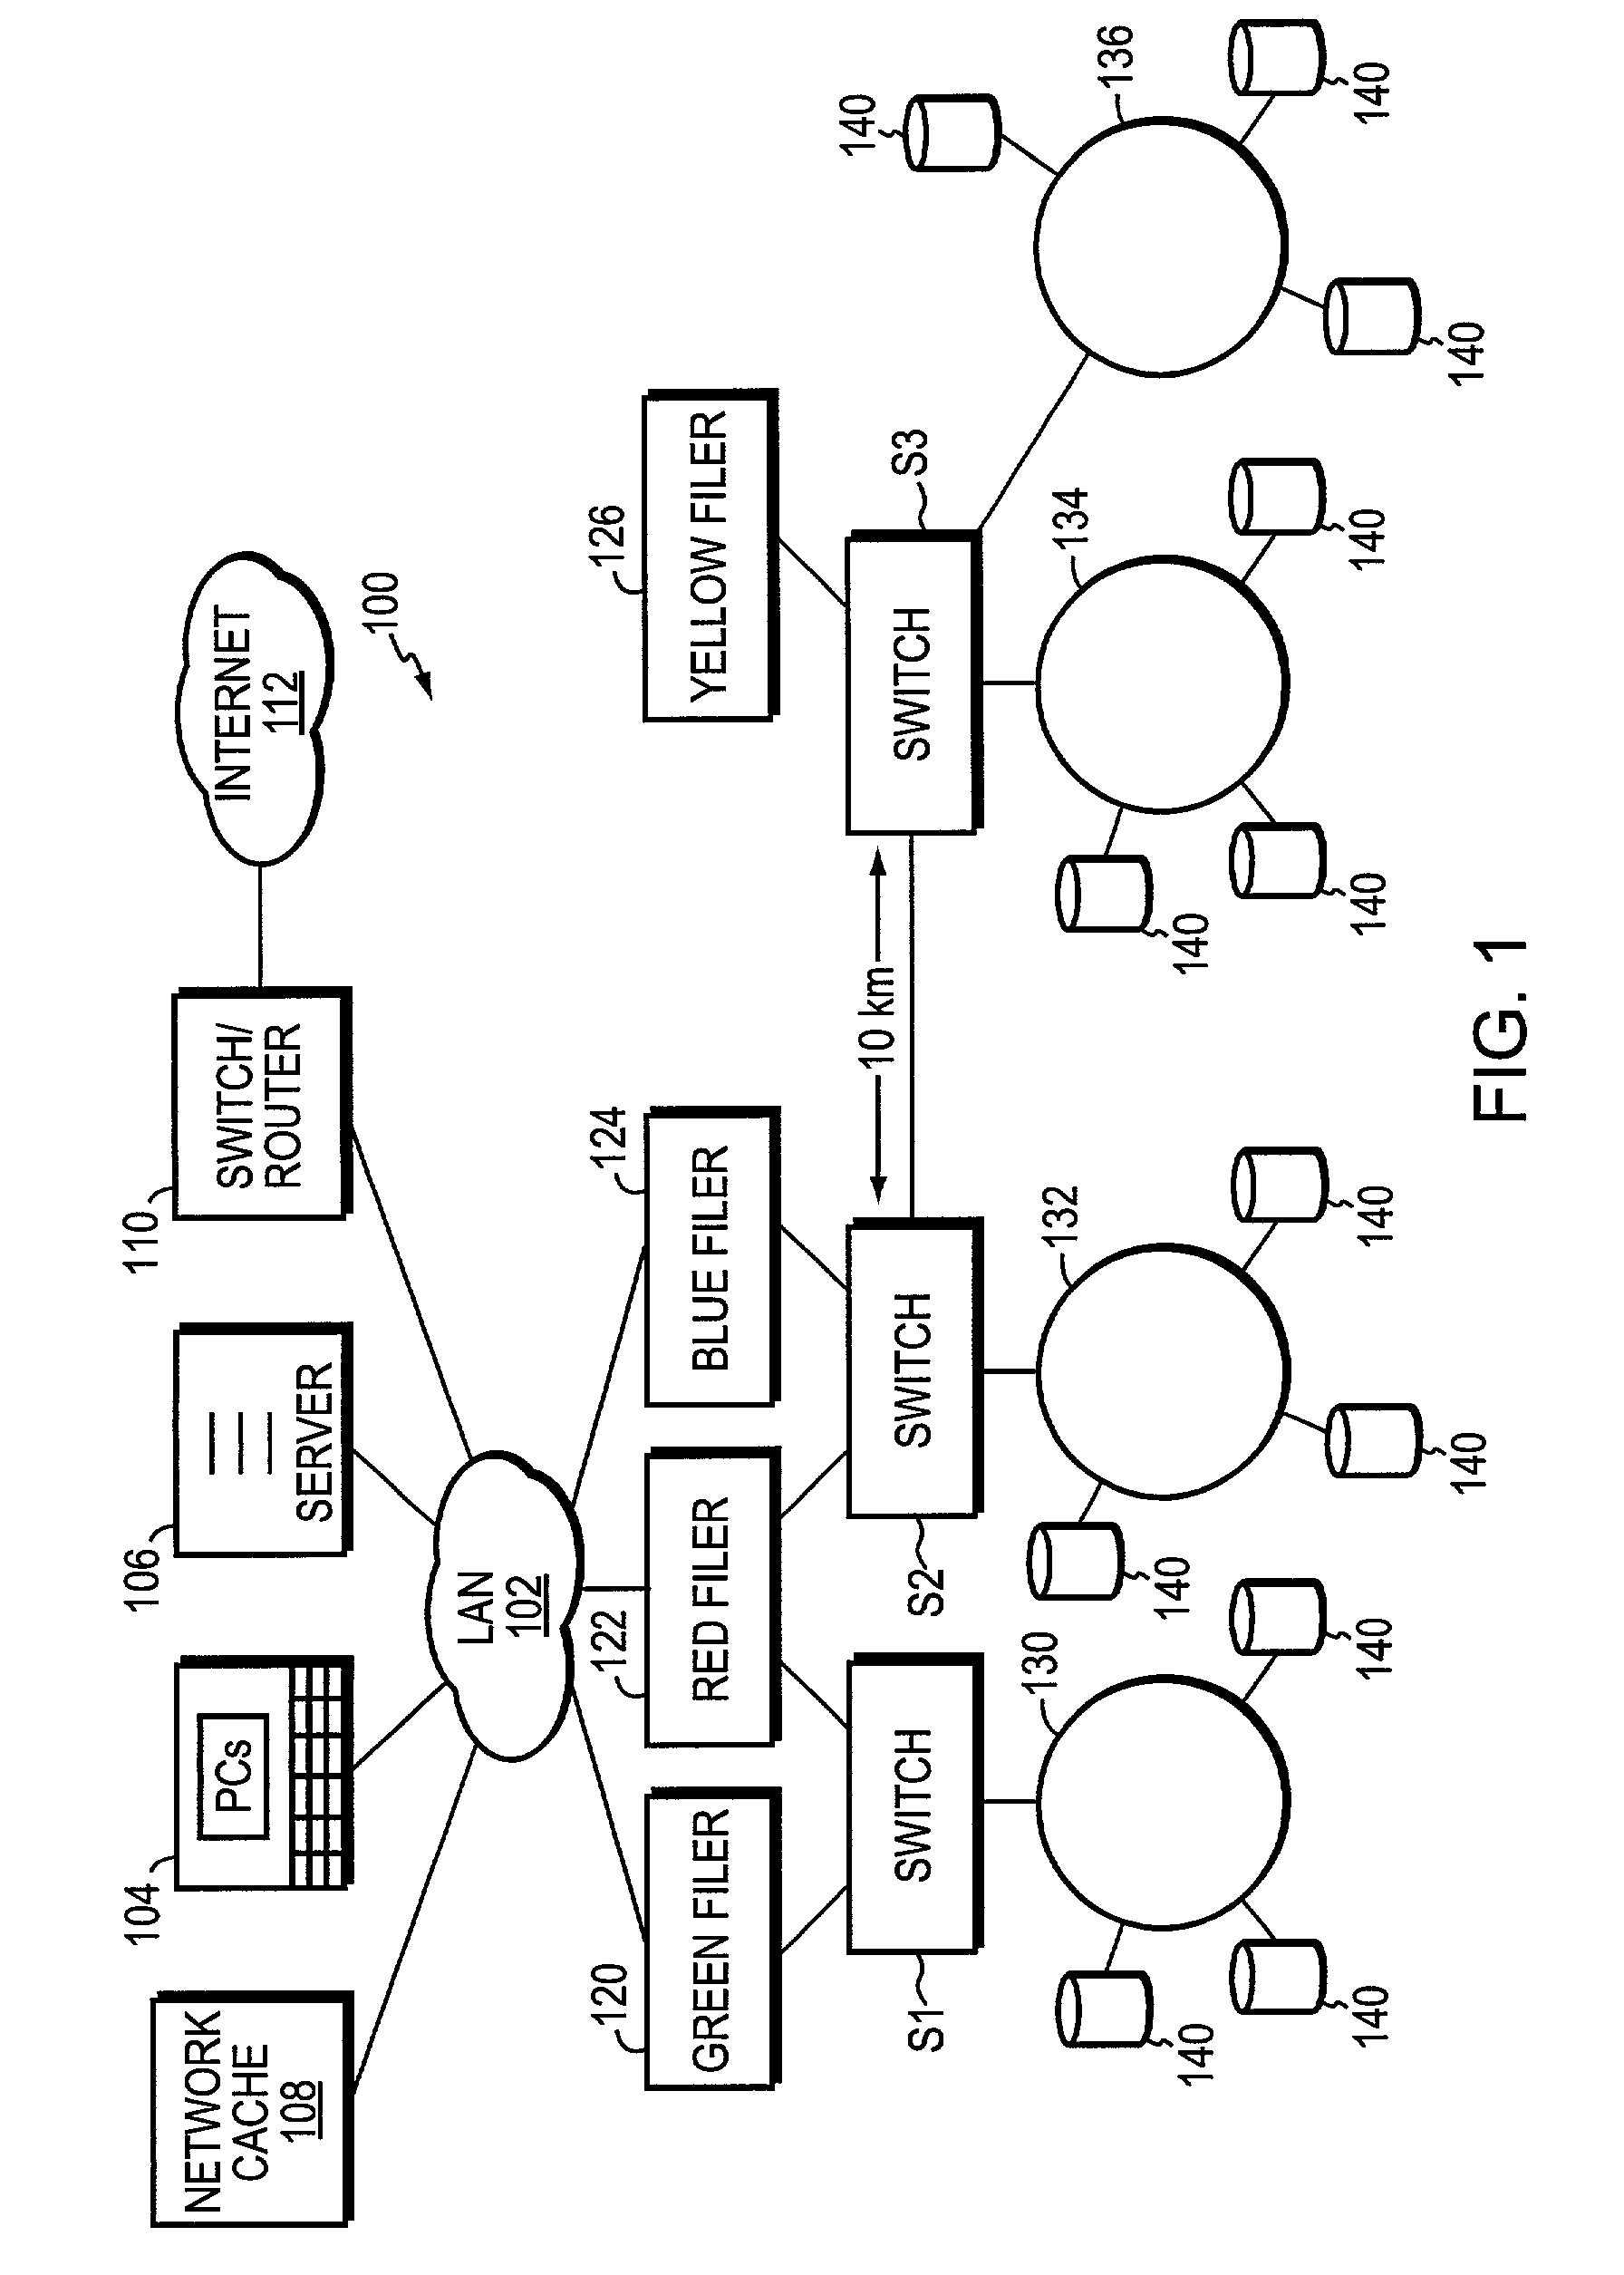 System and method for allocating spare disks in networked storage